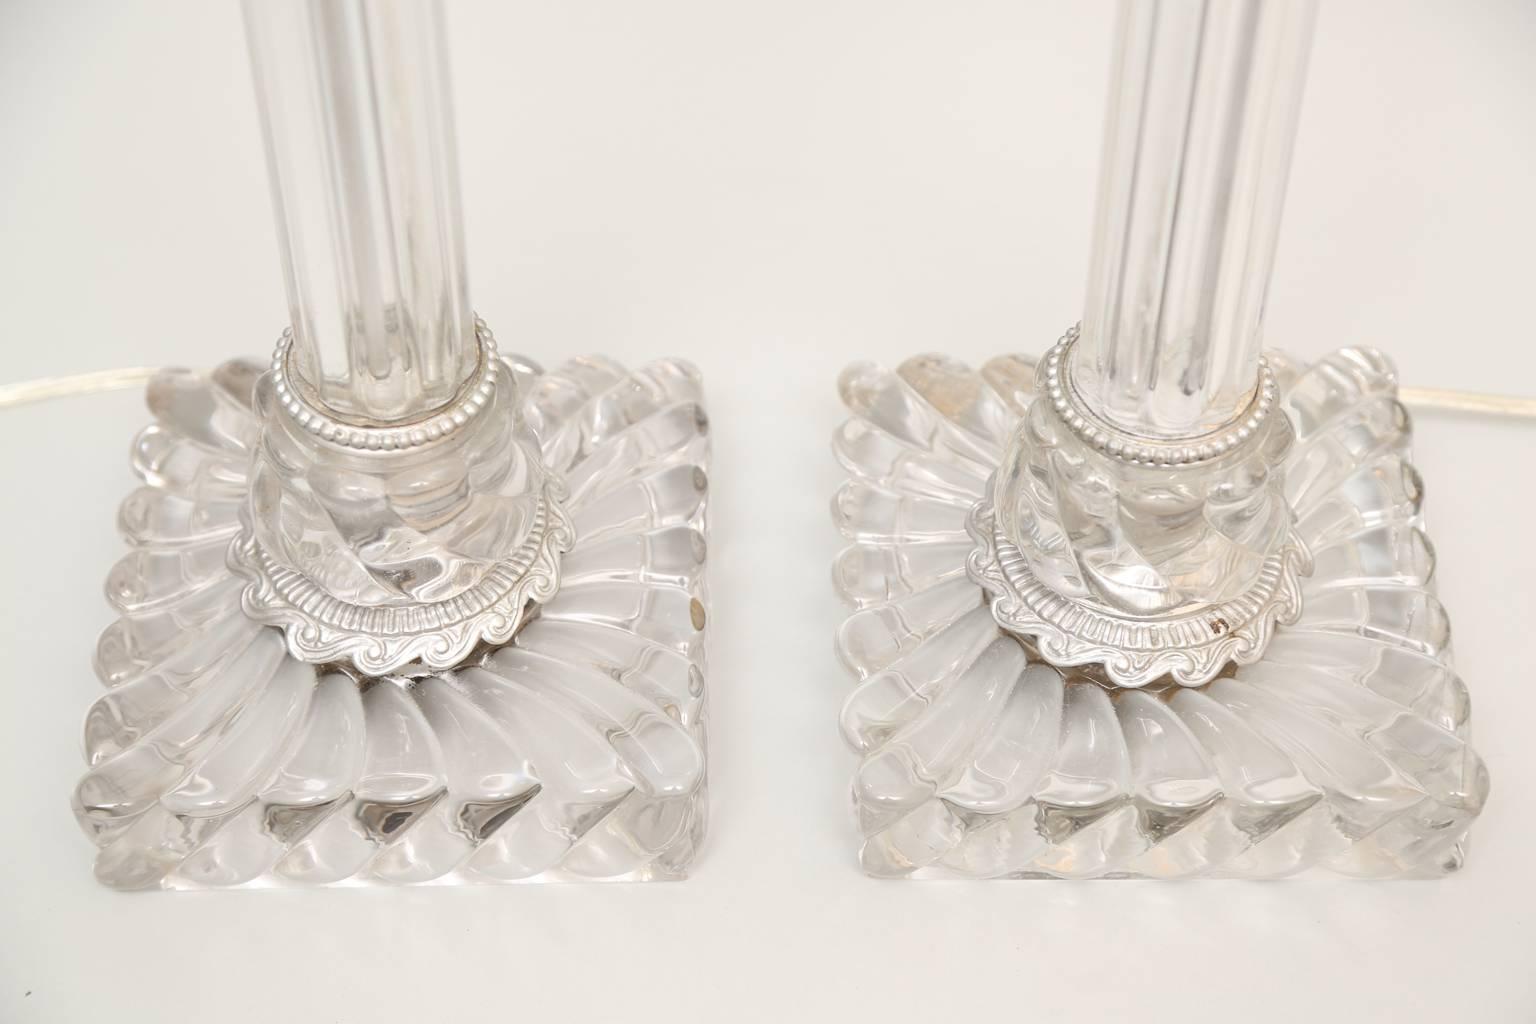 Pair of lamps by Baccarat, originally oil burning, each a handblown fluted glass column raised on square swirling glass base; silver giltwood base and fittings.